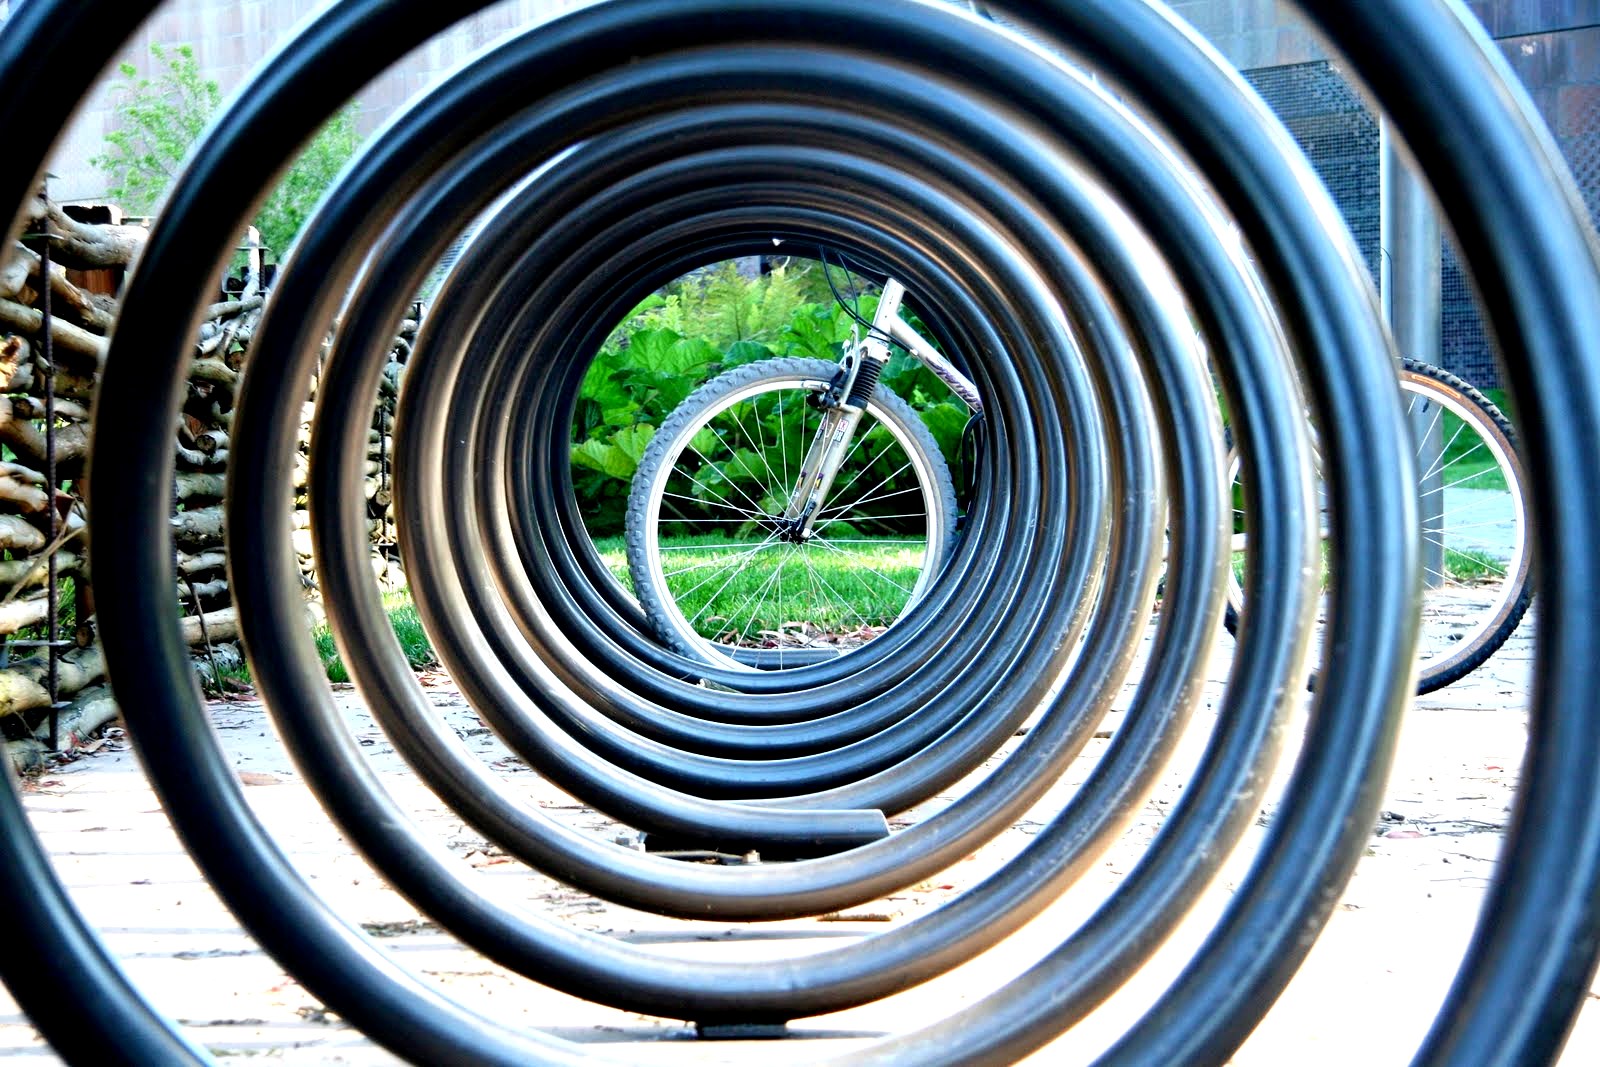 Round and Round - 19 Images of Circular Things